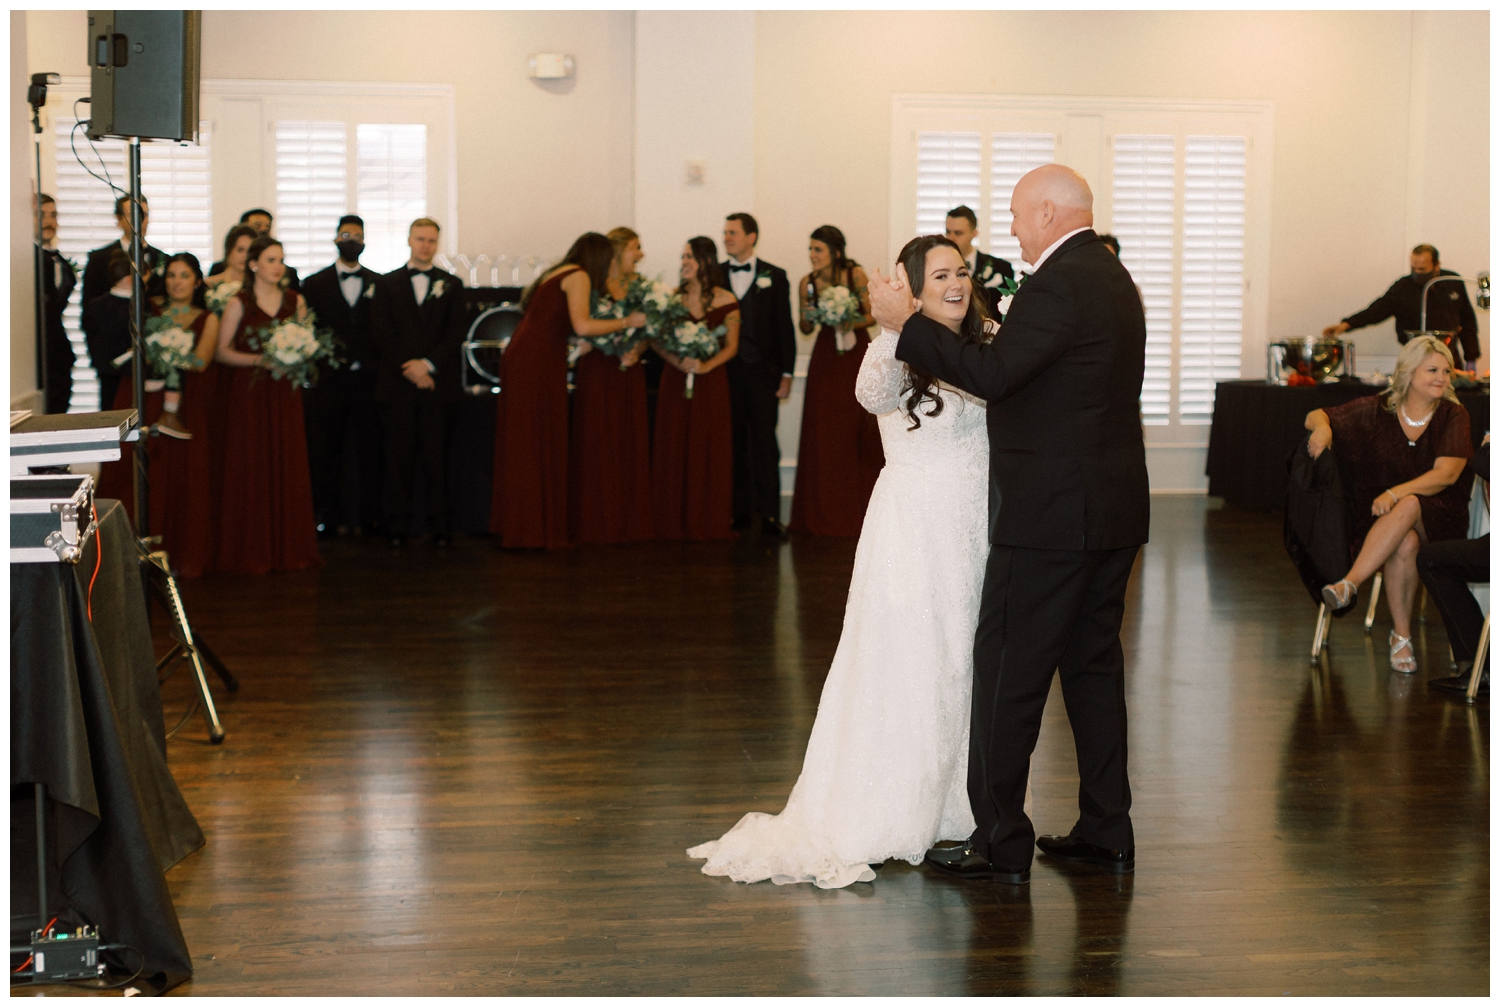 father daughter dance at wedding reception in Houston Texas